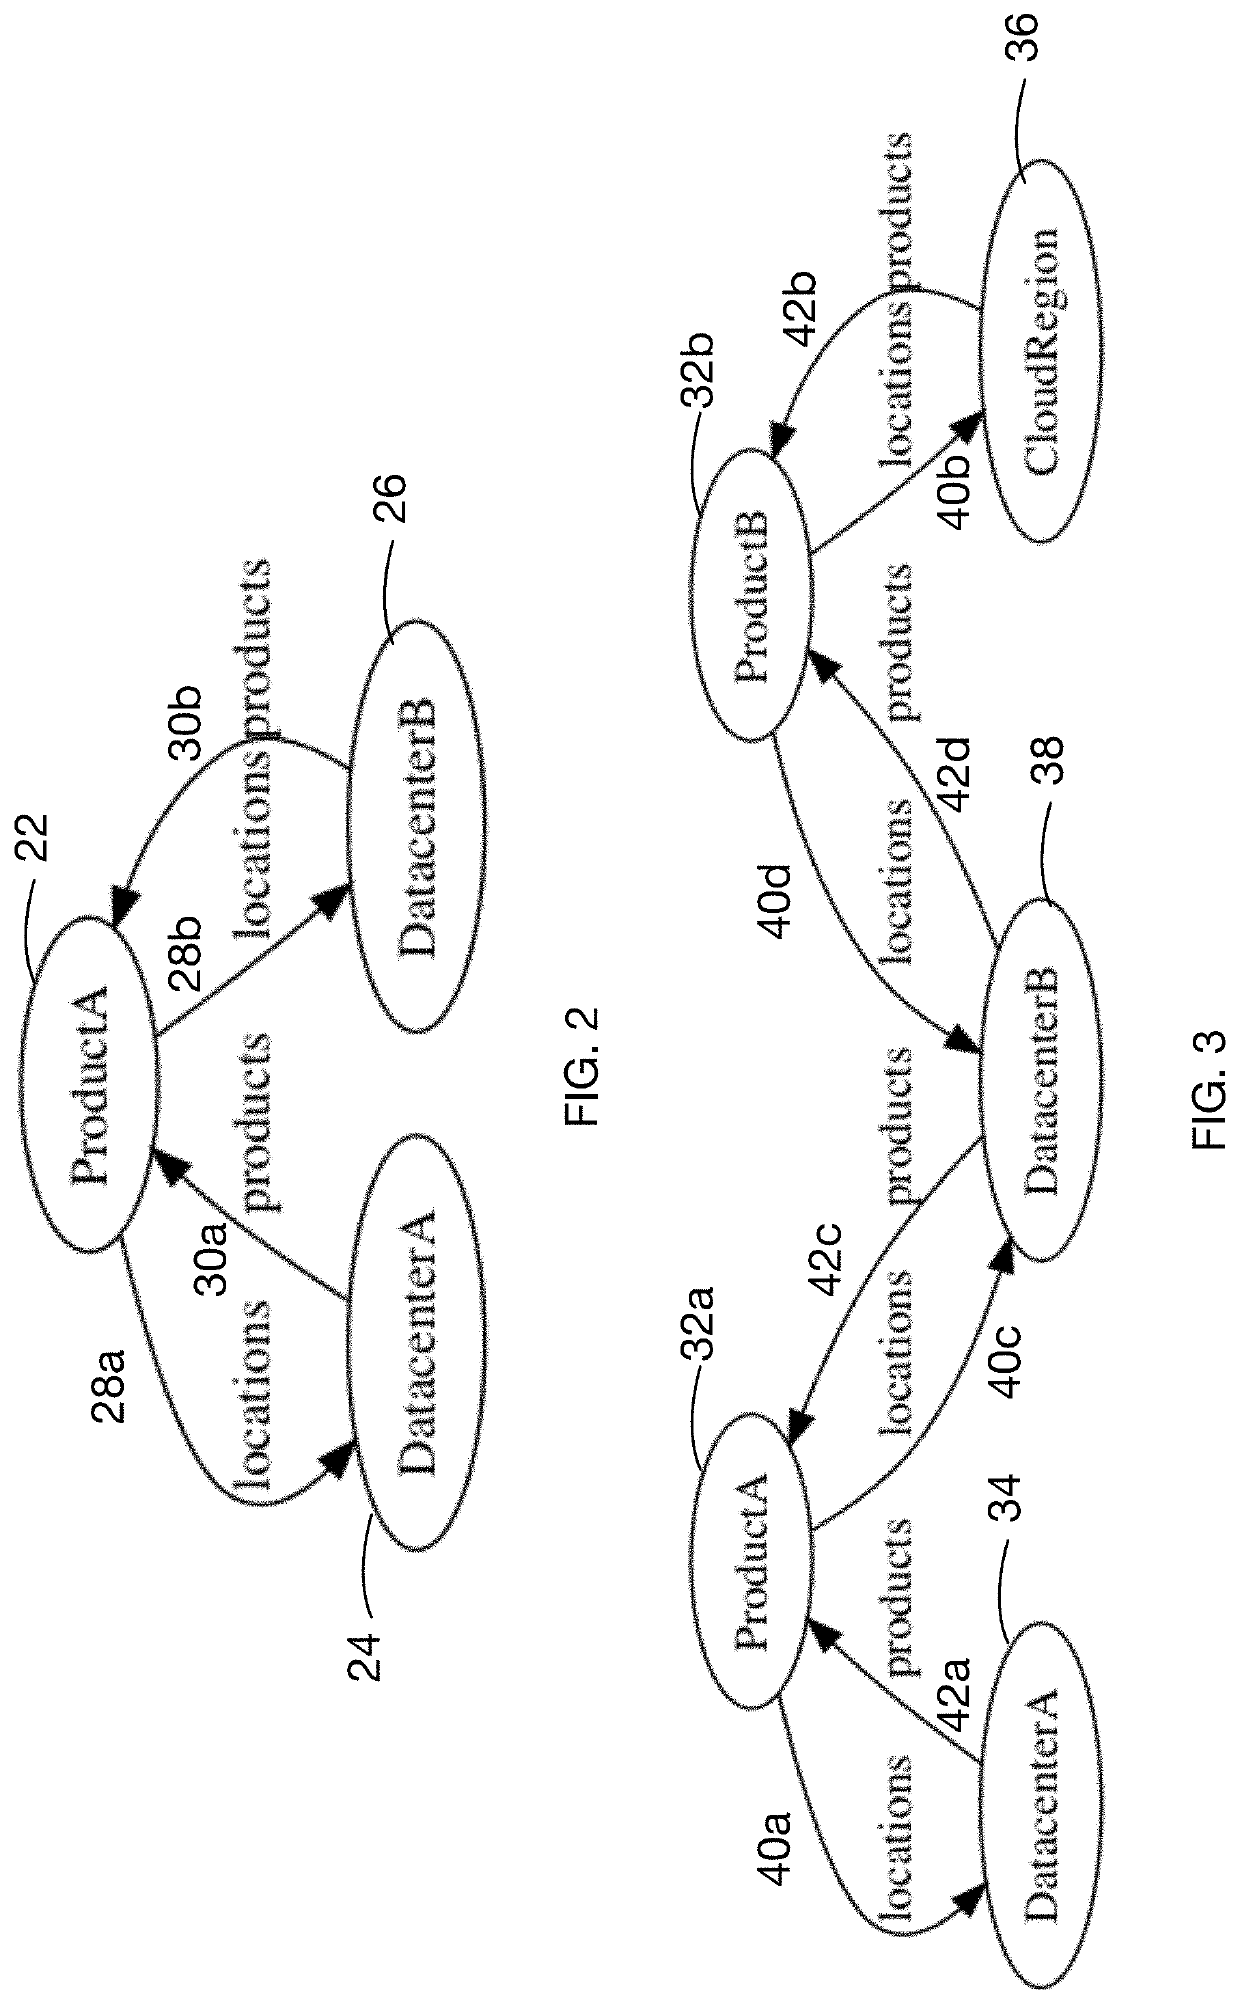 Methods and systems for route finding in network and a network of networks